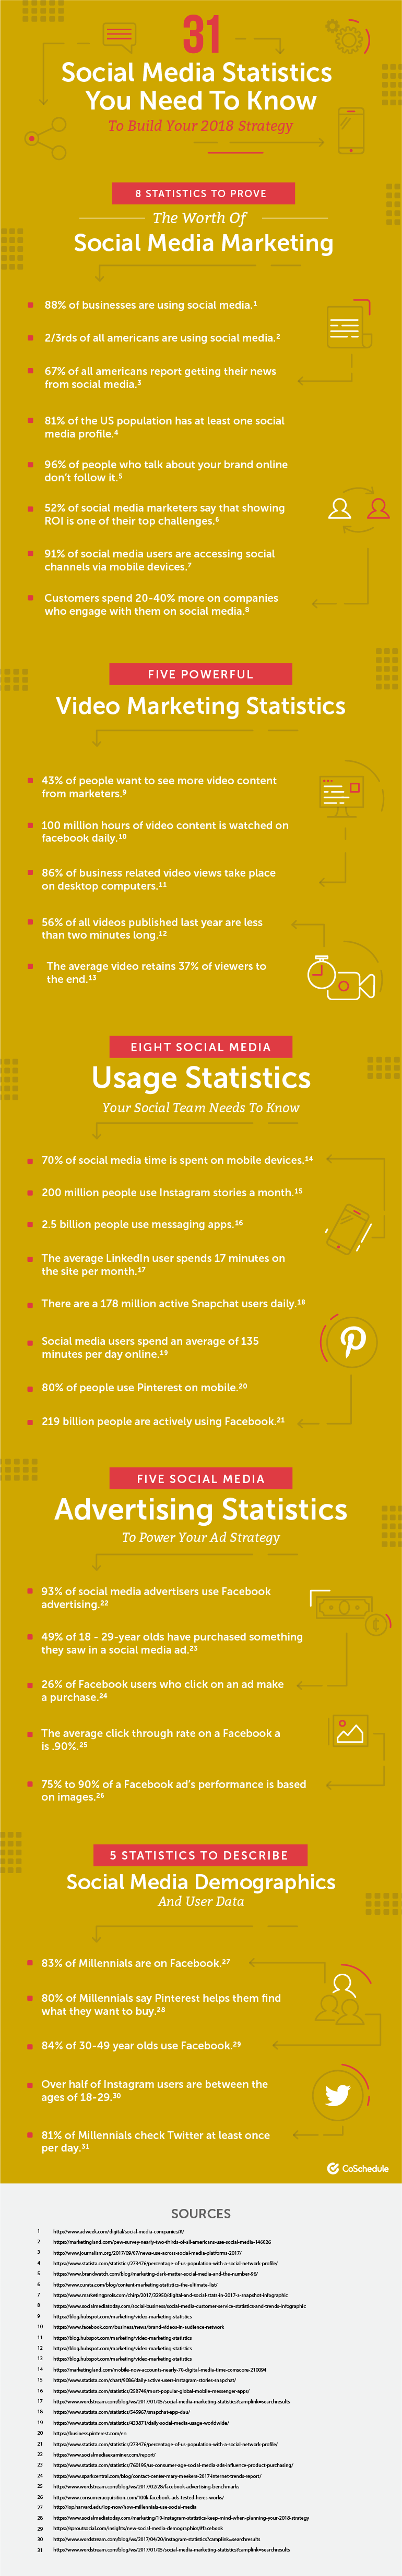 101 Social Media Statistics You Need To Know To Build Your 2018 Strategy - infographic